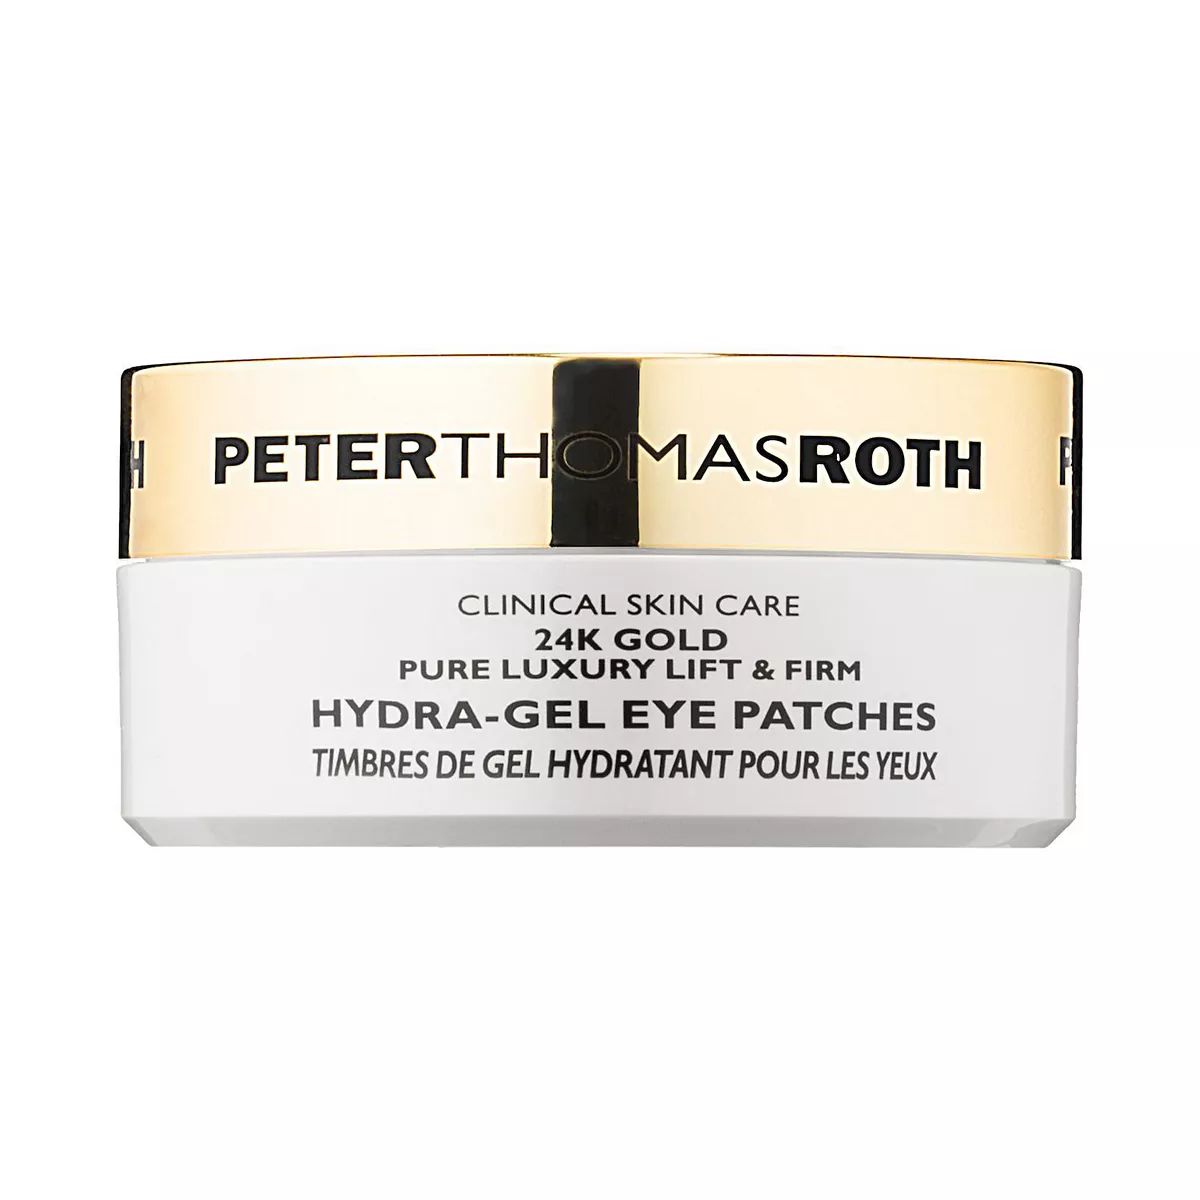 Peter Thomas Roth 24K Gold Pure Luxury Lift & Firm Hydra-Gel Eye Patches | Kohl's